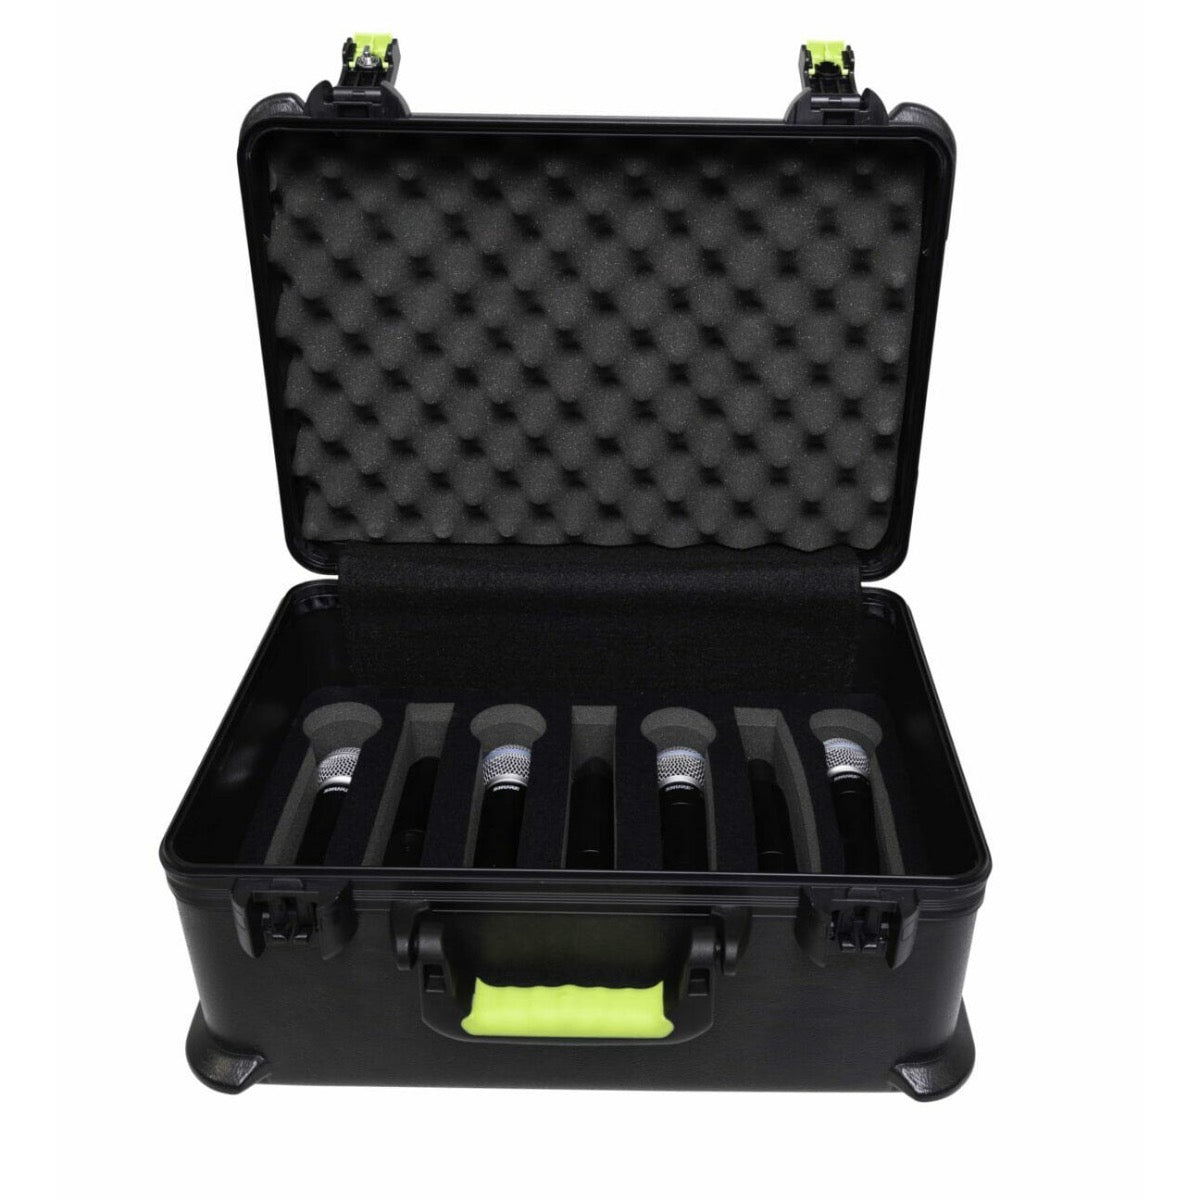 Shure SH-MICCASEW07 Plastic Case With TSA Latches For 7 Wireless Mics and Accessories, View 3